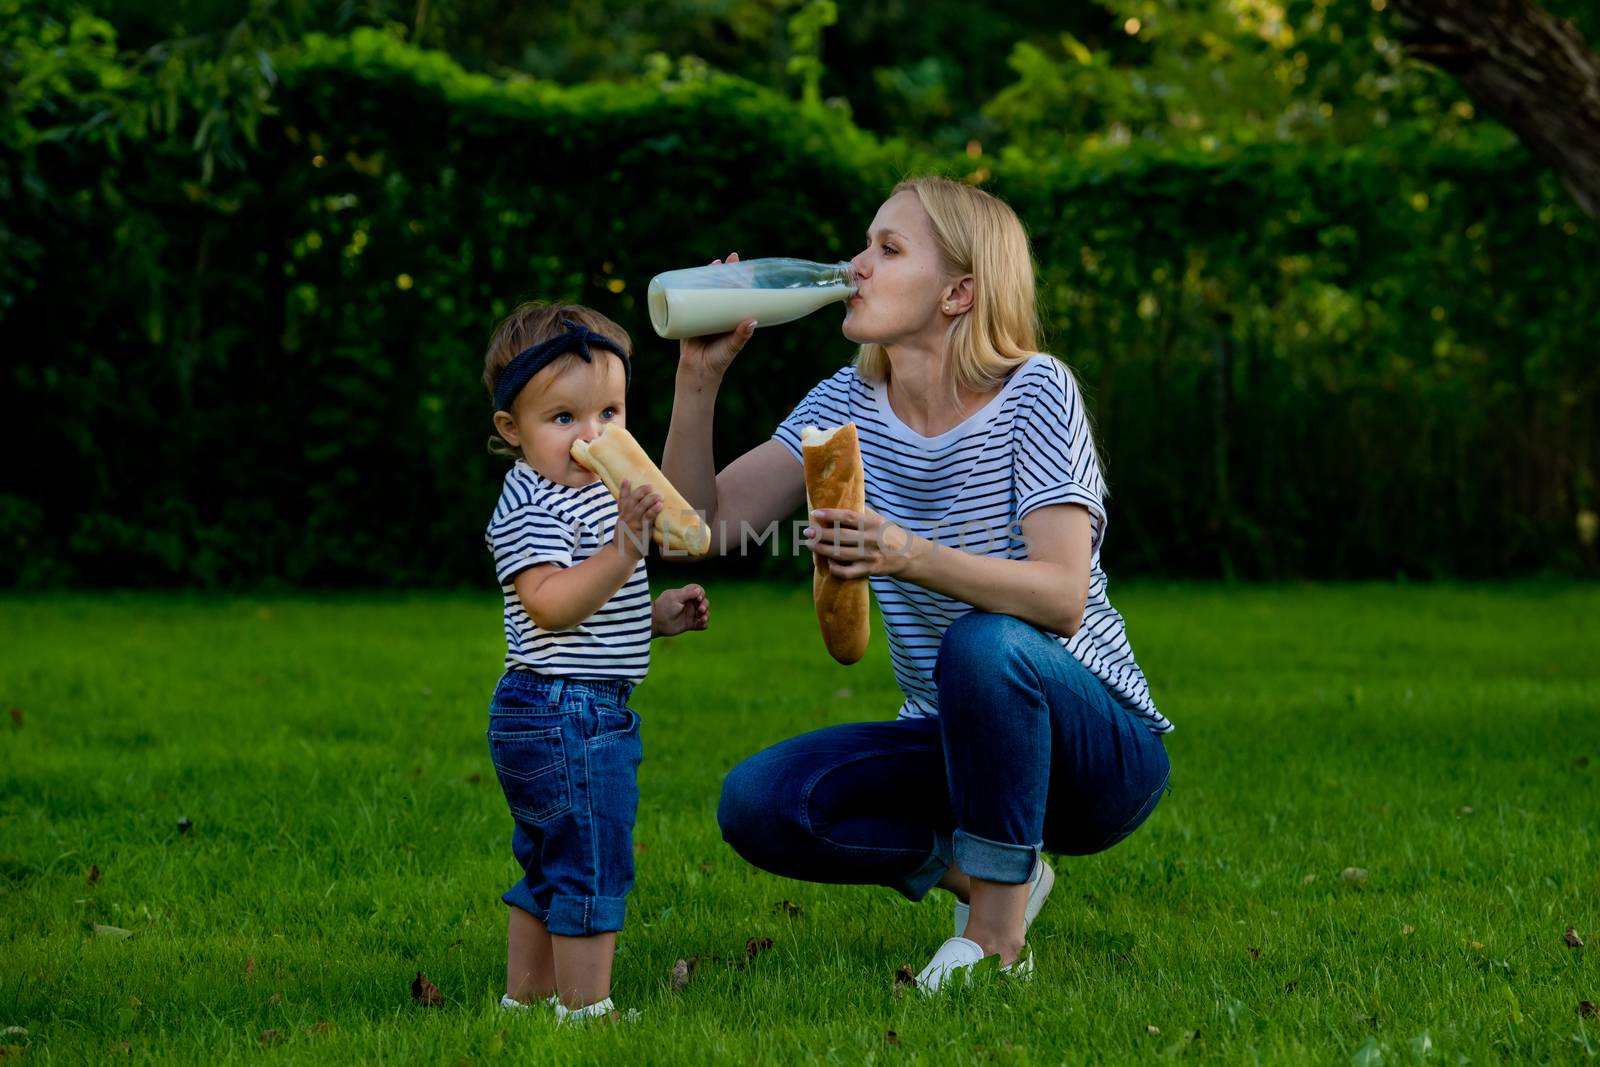 A young woman in jeans and a striped T-shirt drink milk from a glass bottle. Family picnic.